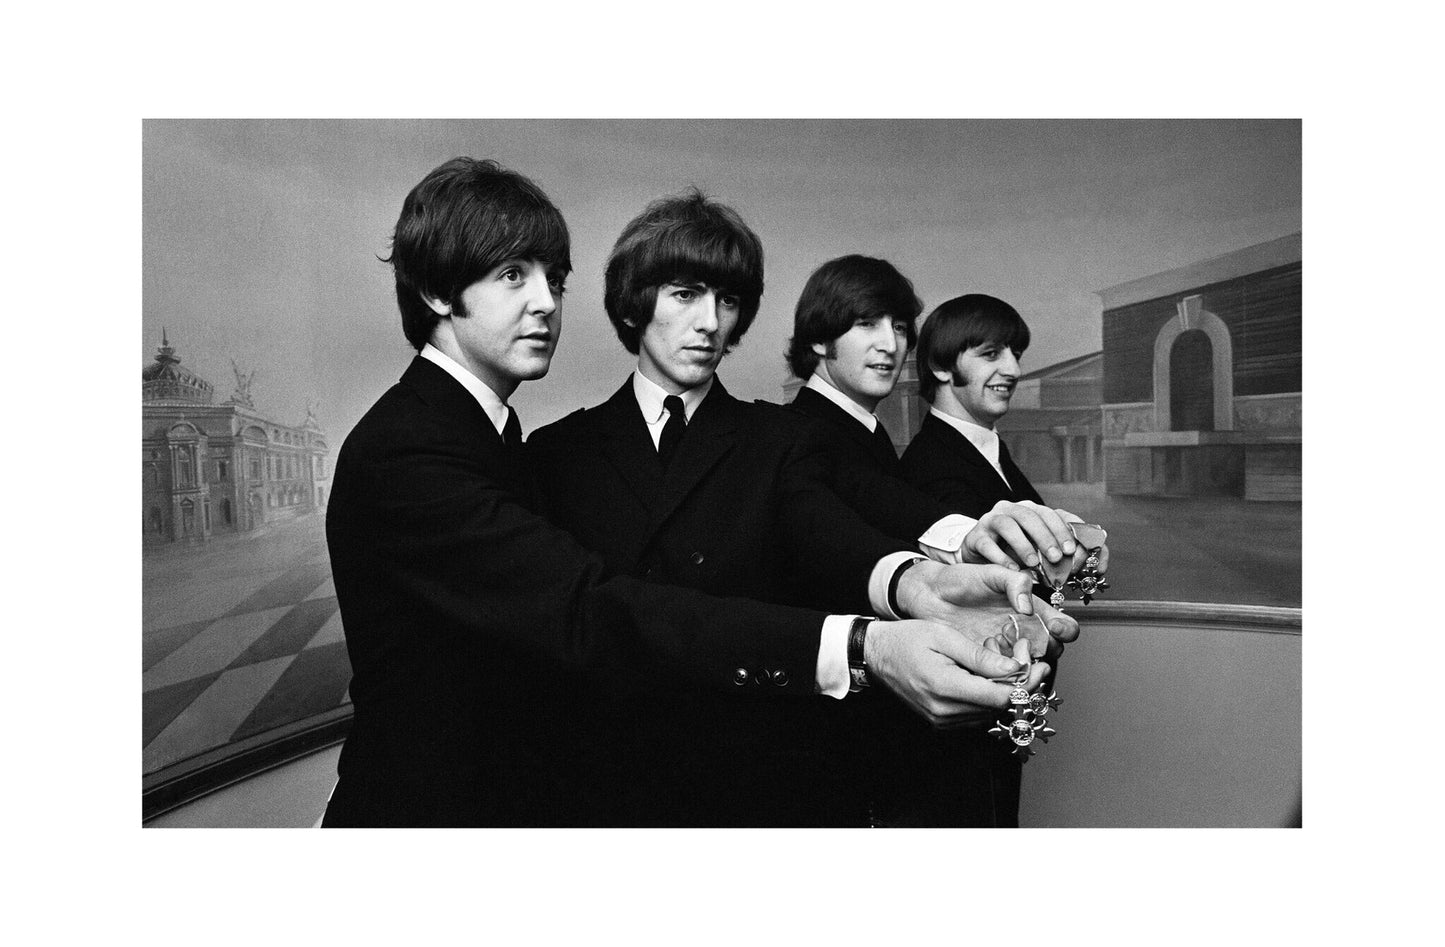 The Beatles - Showing Their MBE Medals at Buckingham Palace, Print 2